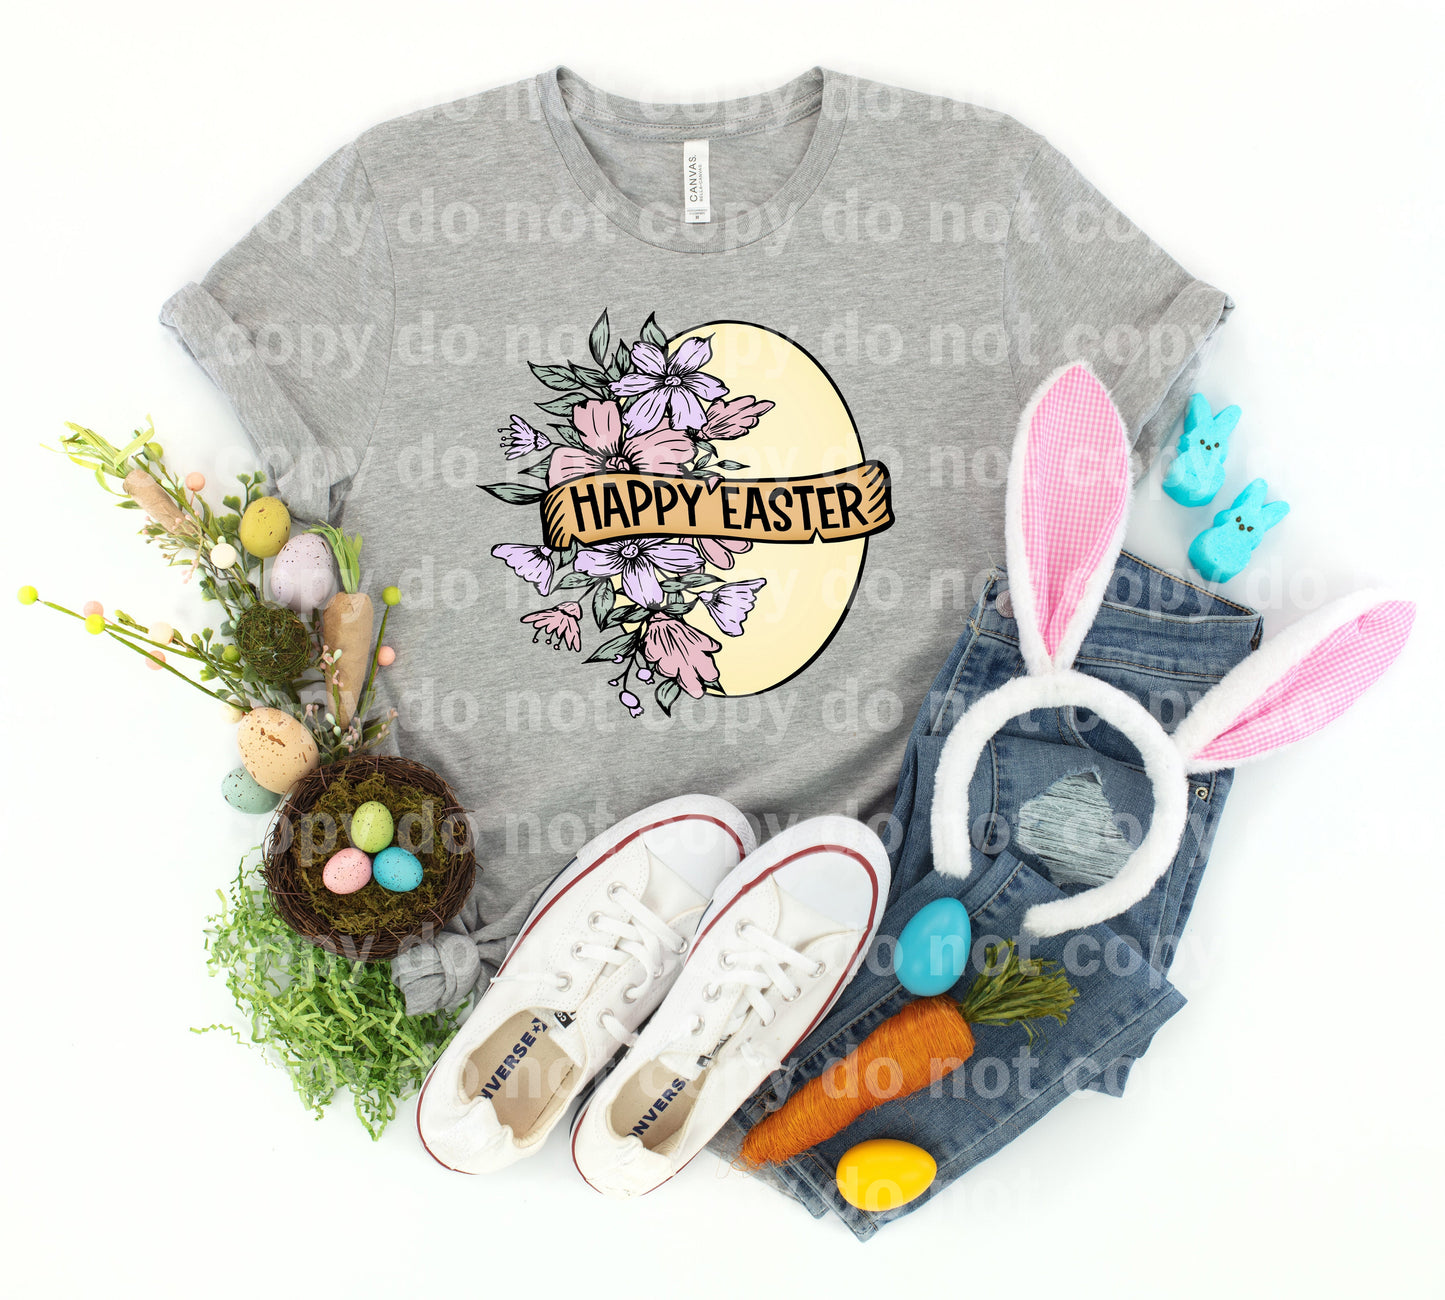 Happy Easter Flower Egg Full Color/One Color Dream Print or Sublimation Print